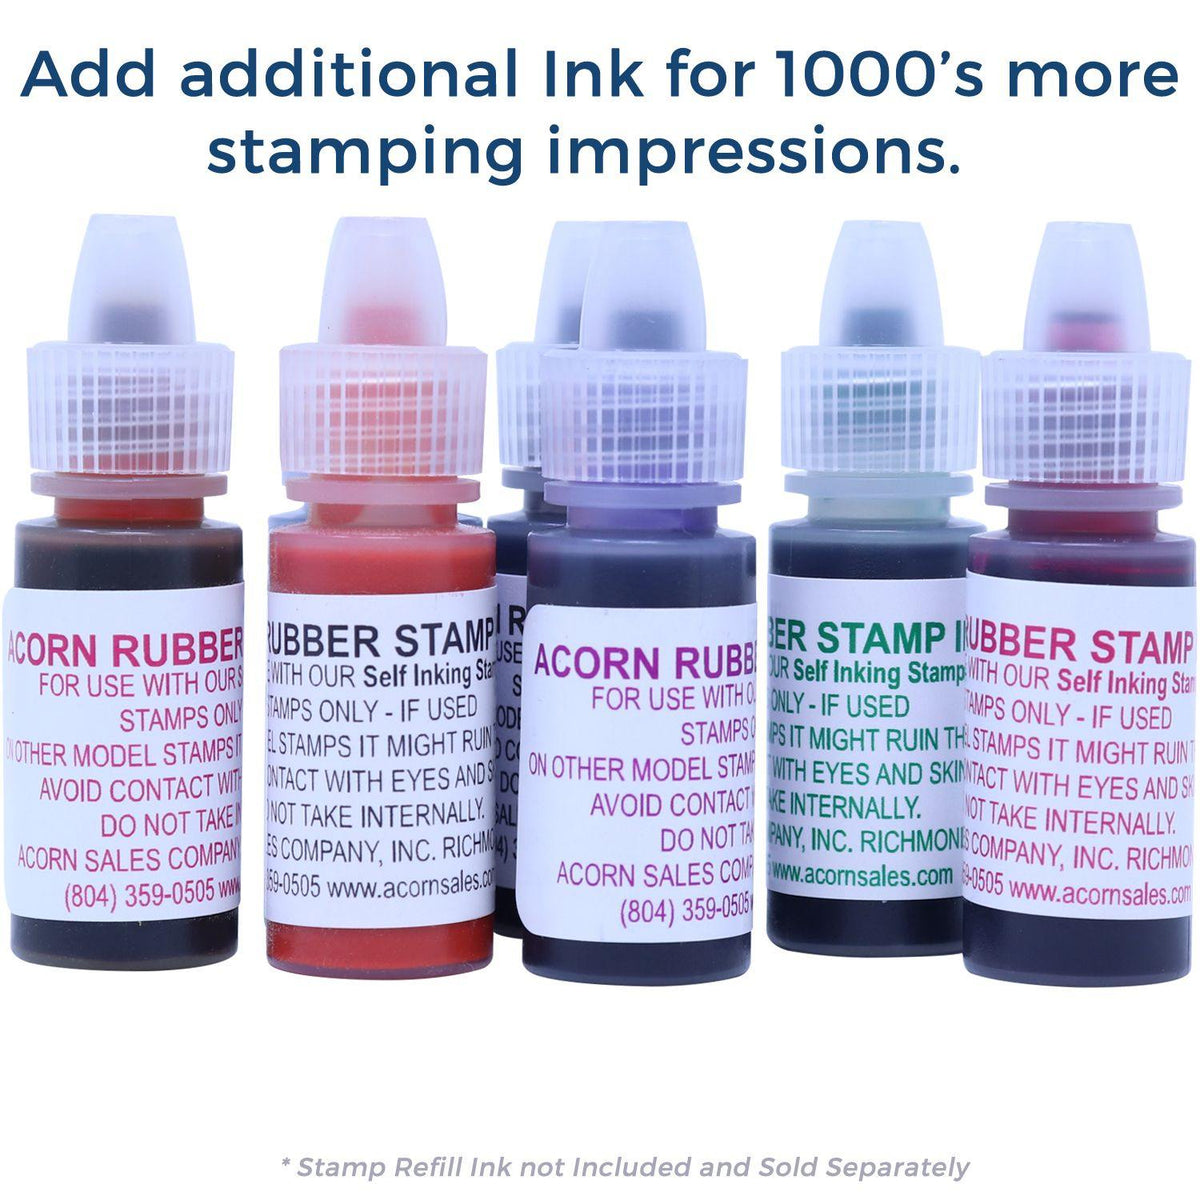 Refill Inks for Large Pre-Inked Contact Tracing Stamp Available